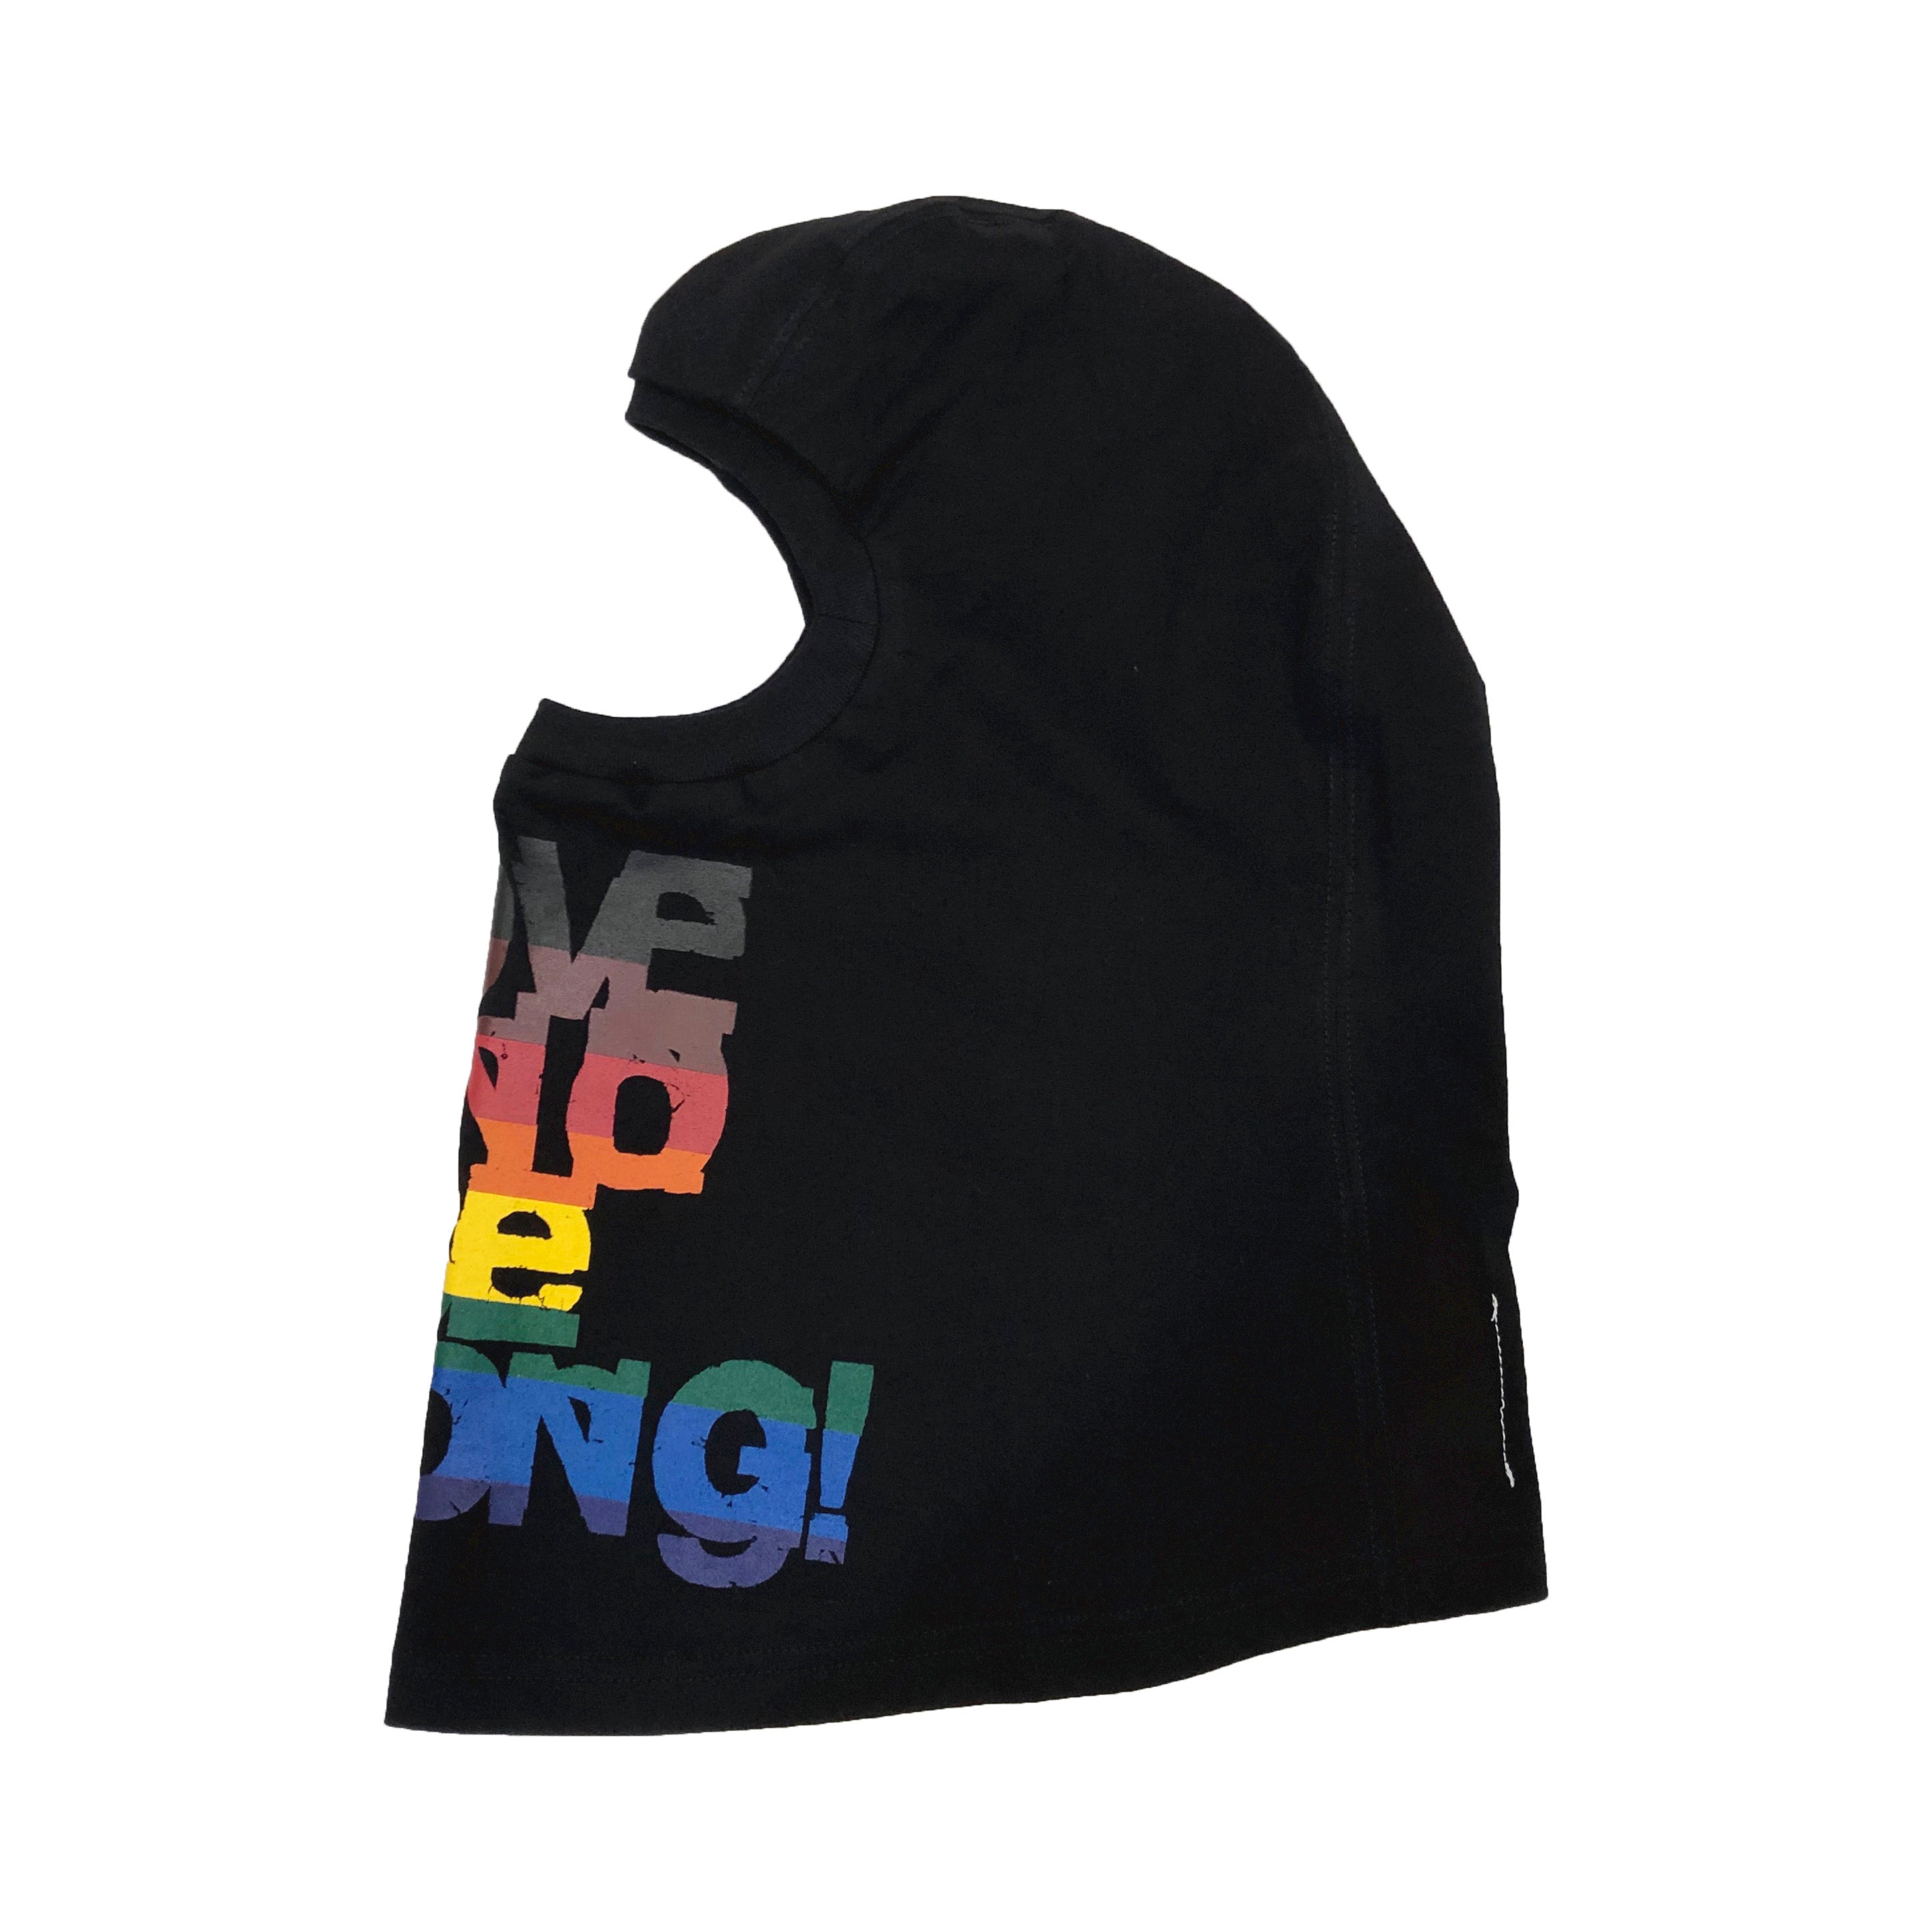 50% OFF THE SOLOIST. "LOVE AND BE STRONG" BALACLAVA / HEAD COVER